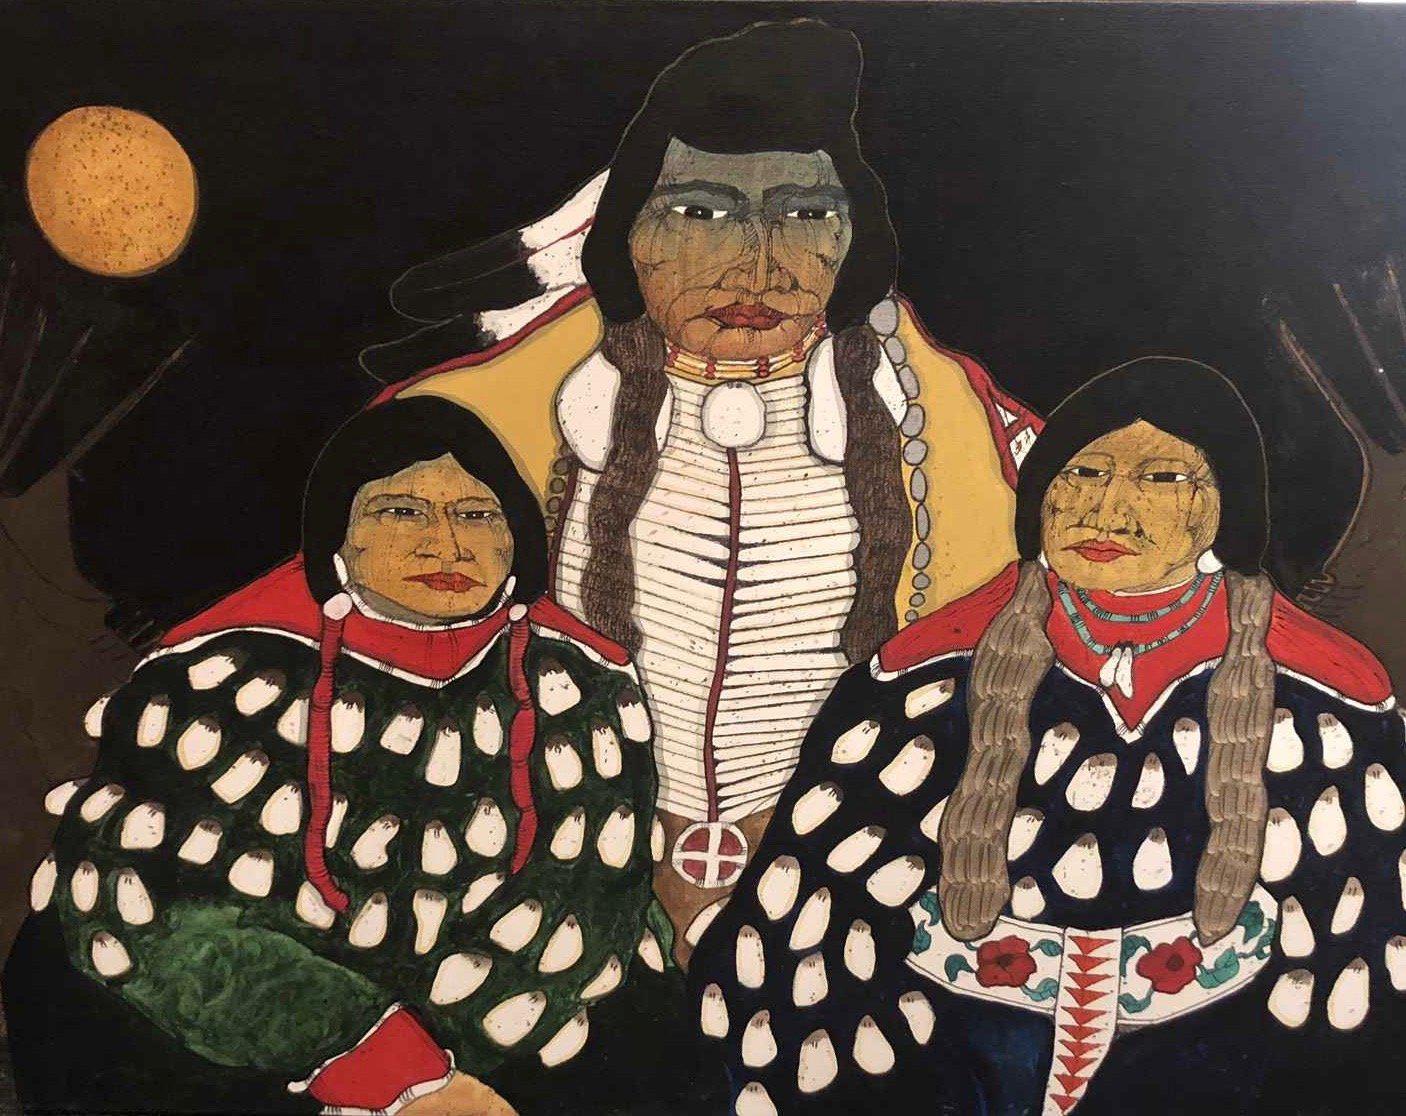 Crow Man and Ladies (1978)-Painting-Kevin Red Star-Sorrel Sky Gallery